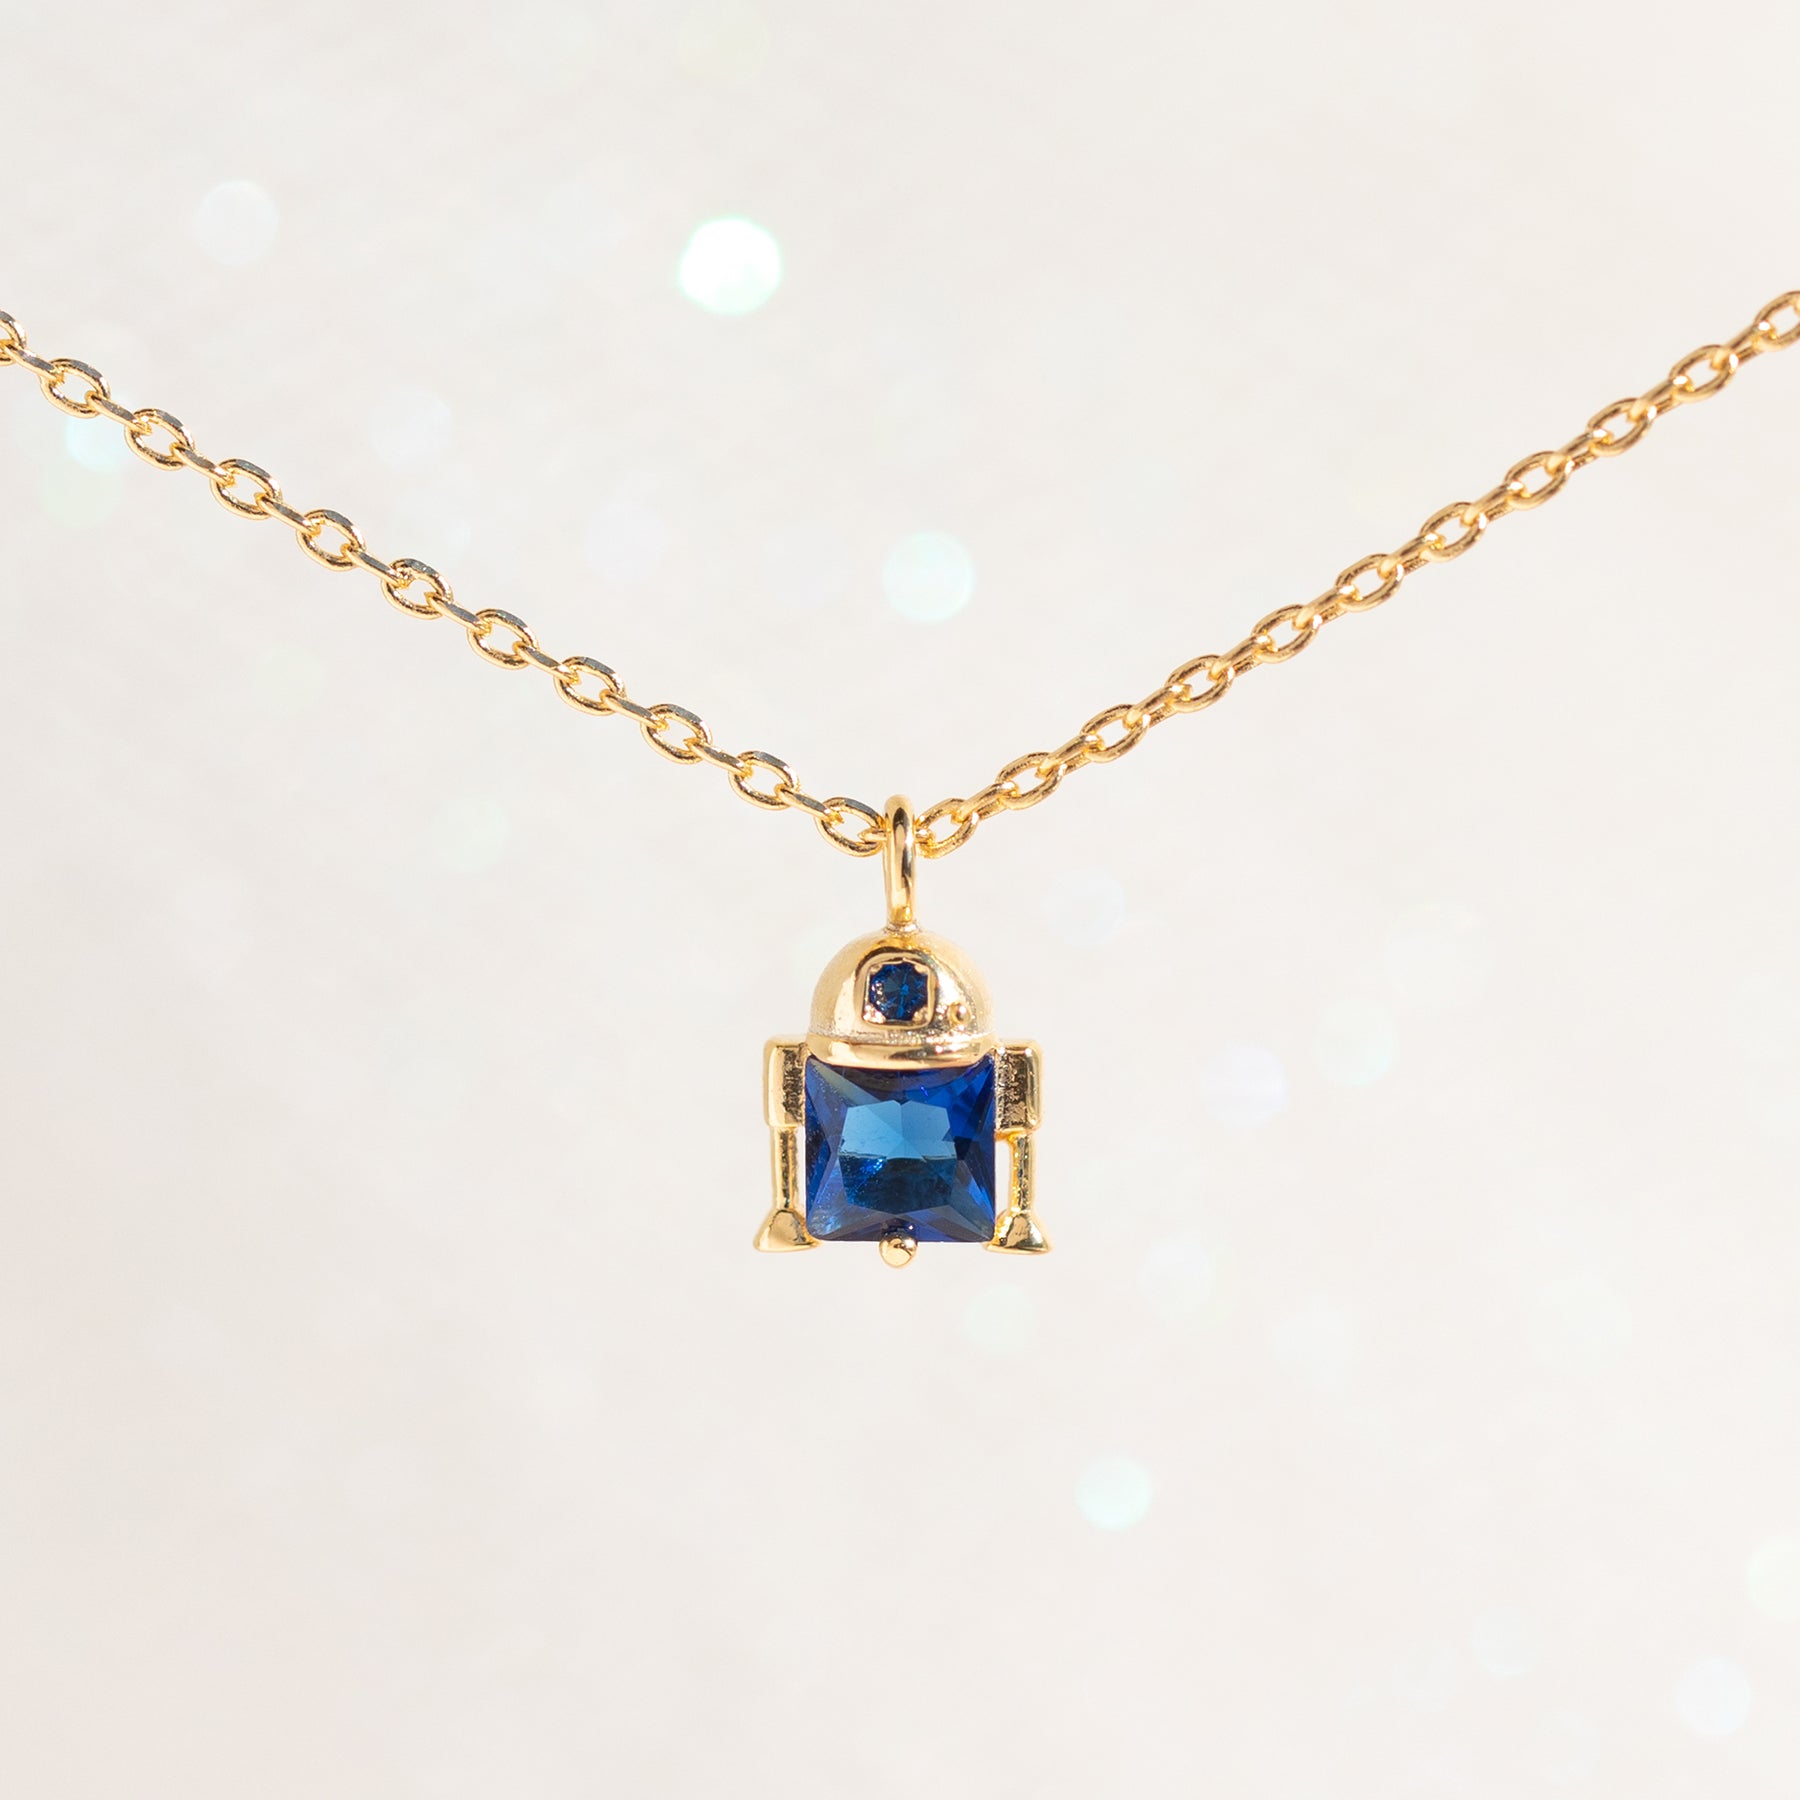 Star Wars R2-D2 Necklace in Gold